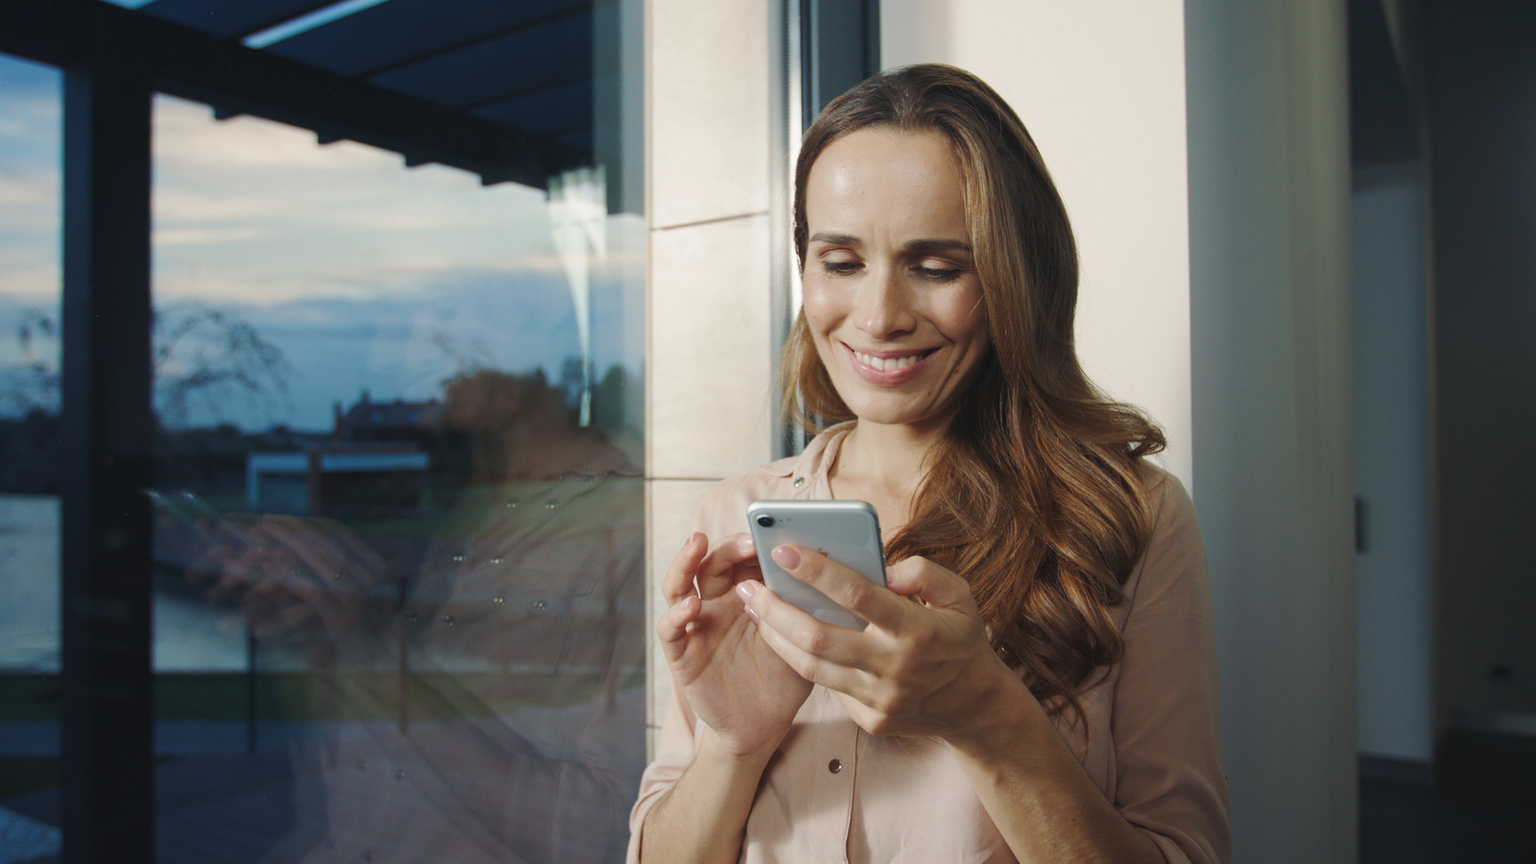 Happy Woman Looking Mobile Phone near. Smiling Woman Scrolling Smartphone.